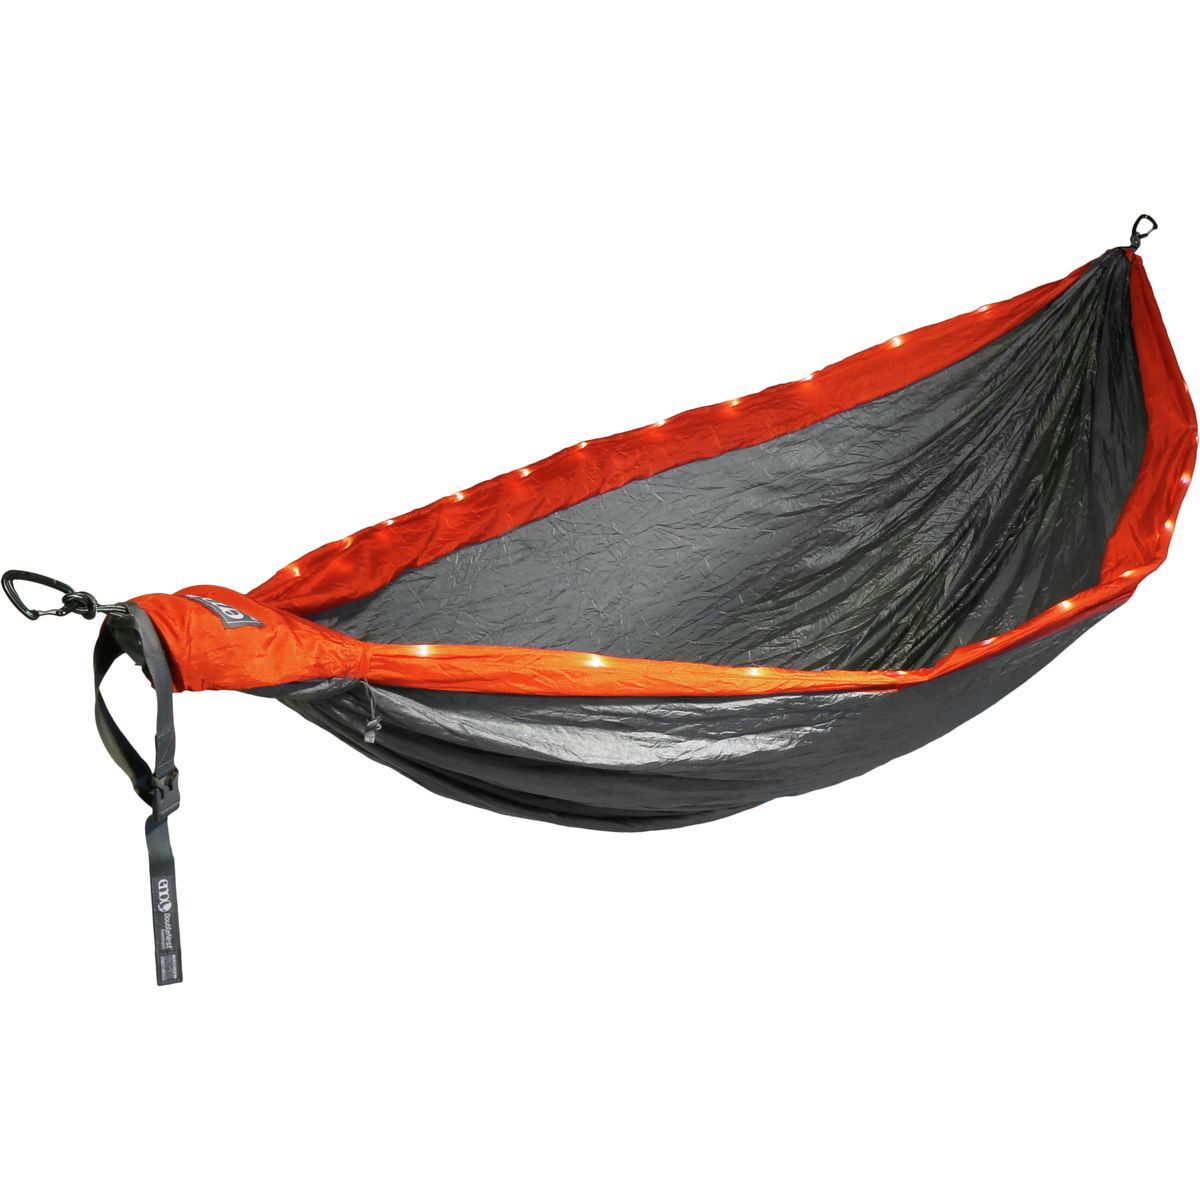 Eagles Nest Outfitters DoubleNest LED Hammock